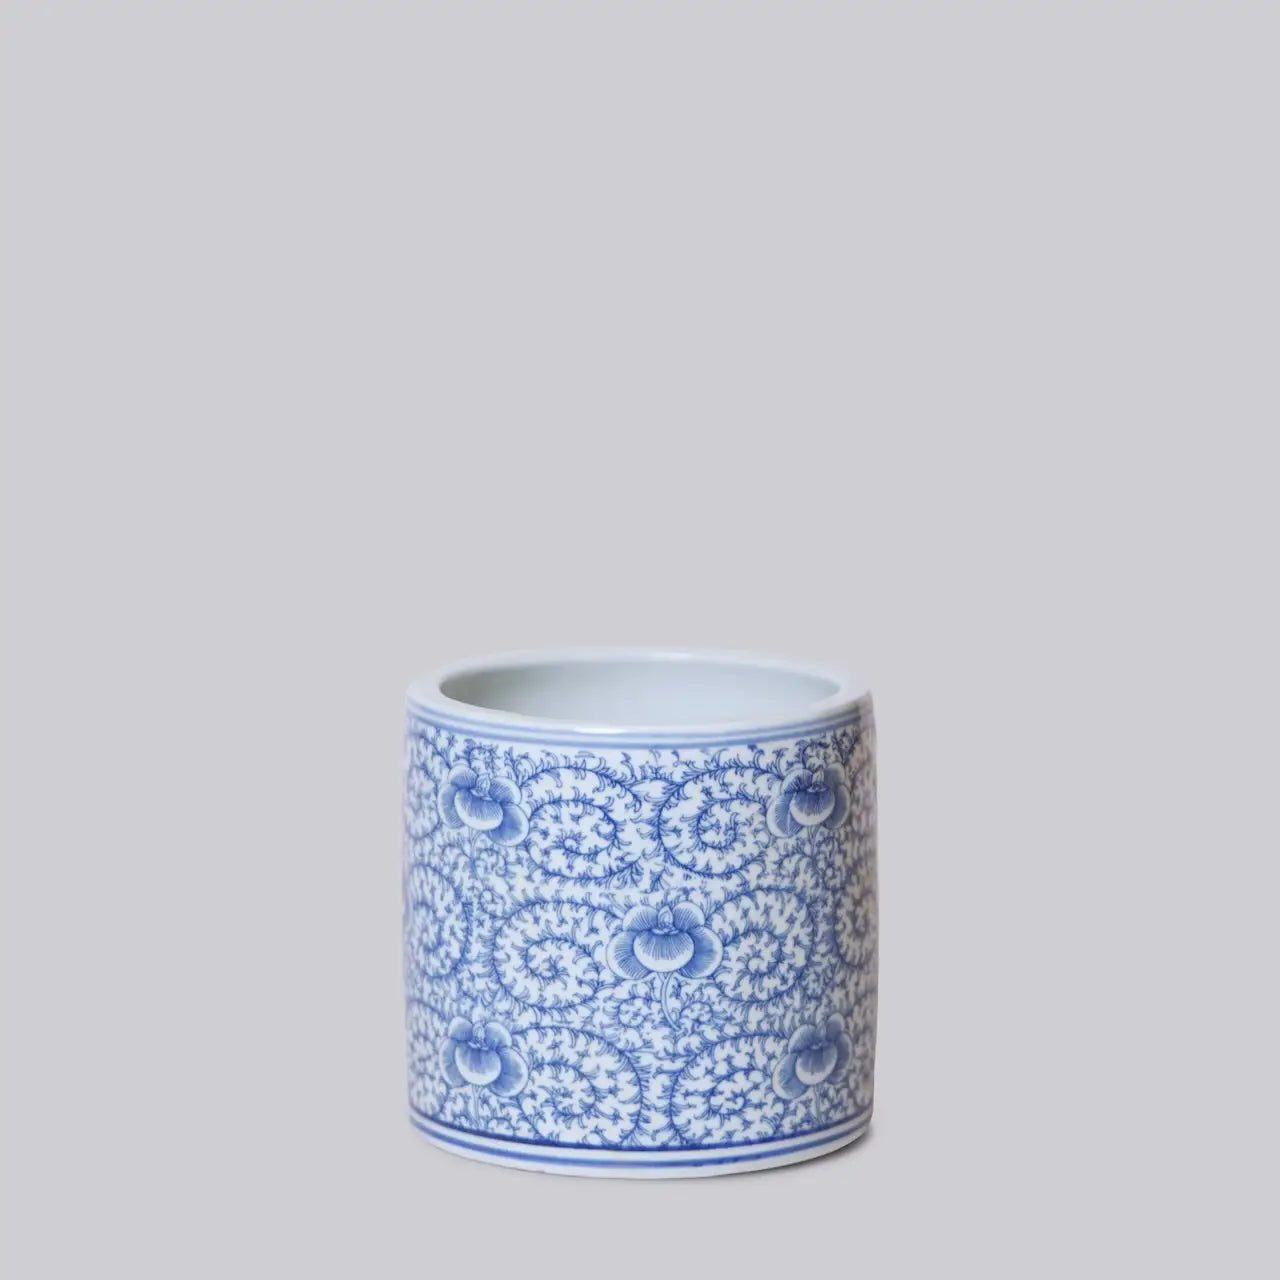 Small Blue and White Porcelain Scrolling Peony Cachepot